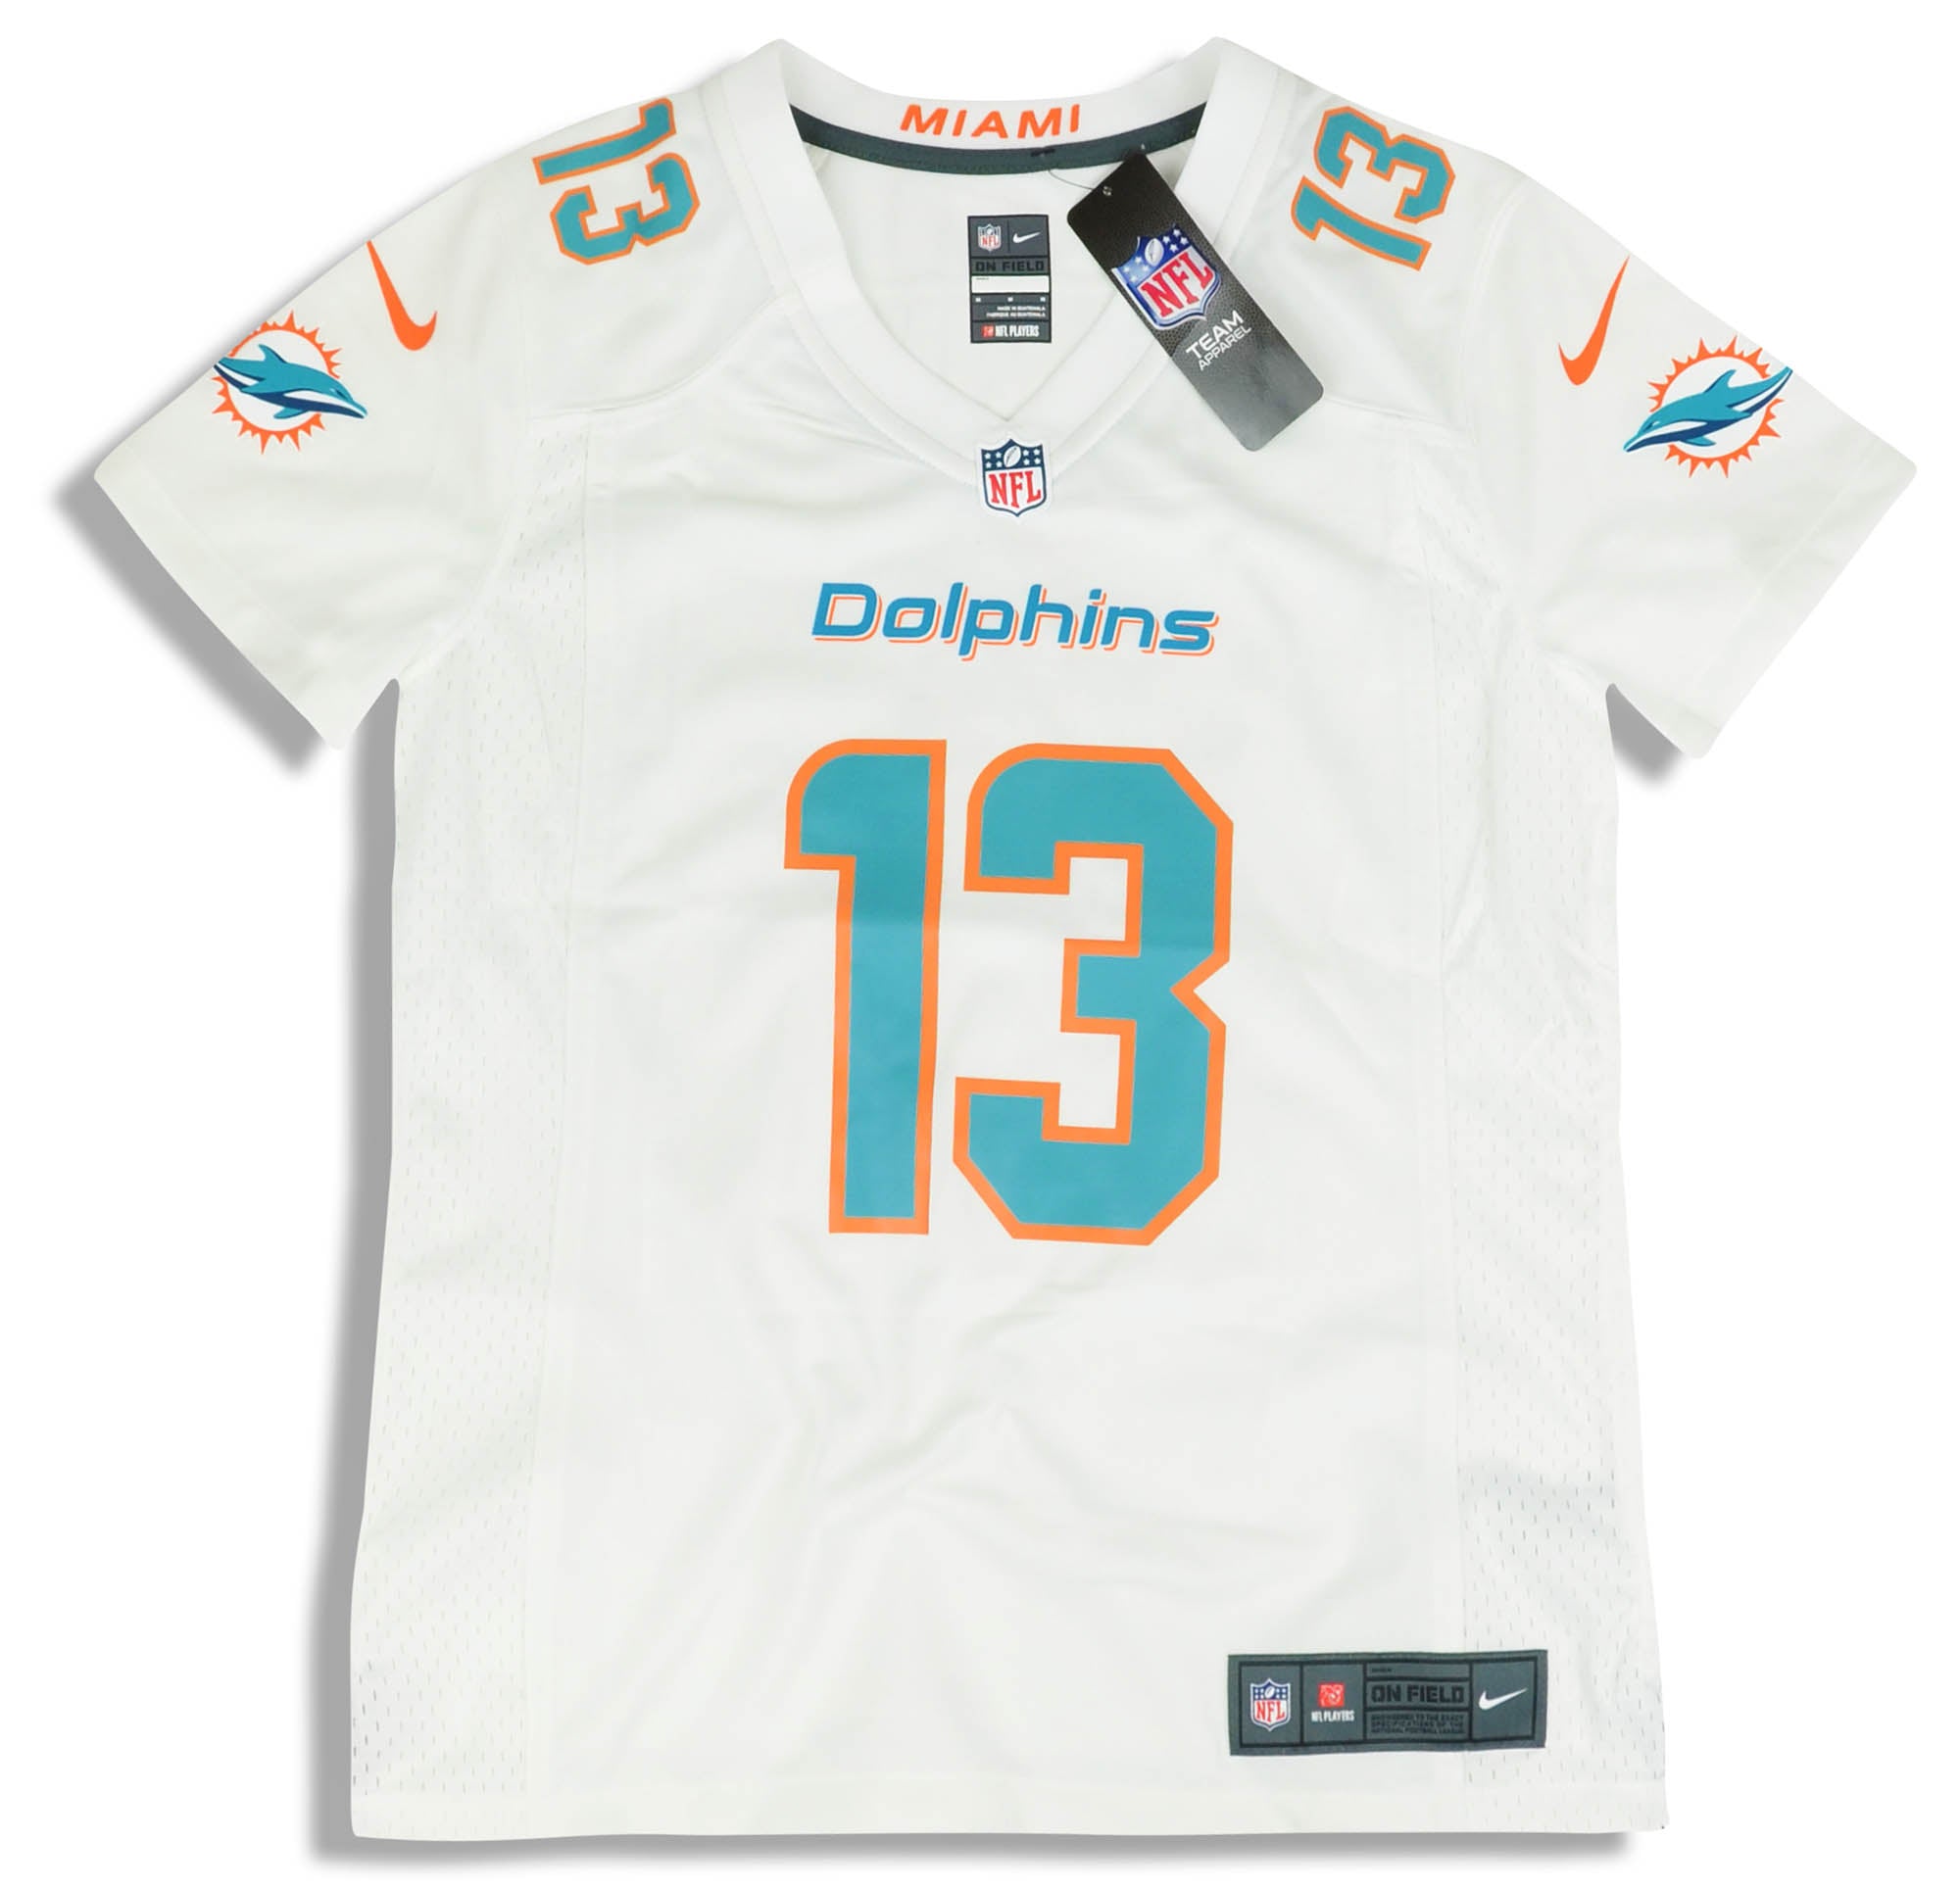 2018 MIAMI DOLPHINS MARINO #13 NIKE GAME JERSEY (AWAY) WOMENS (M) - W/TAGS